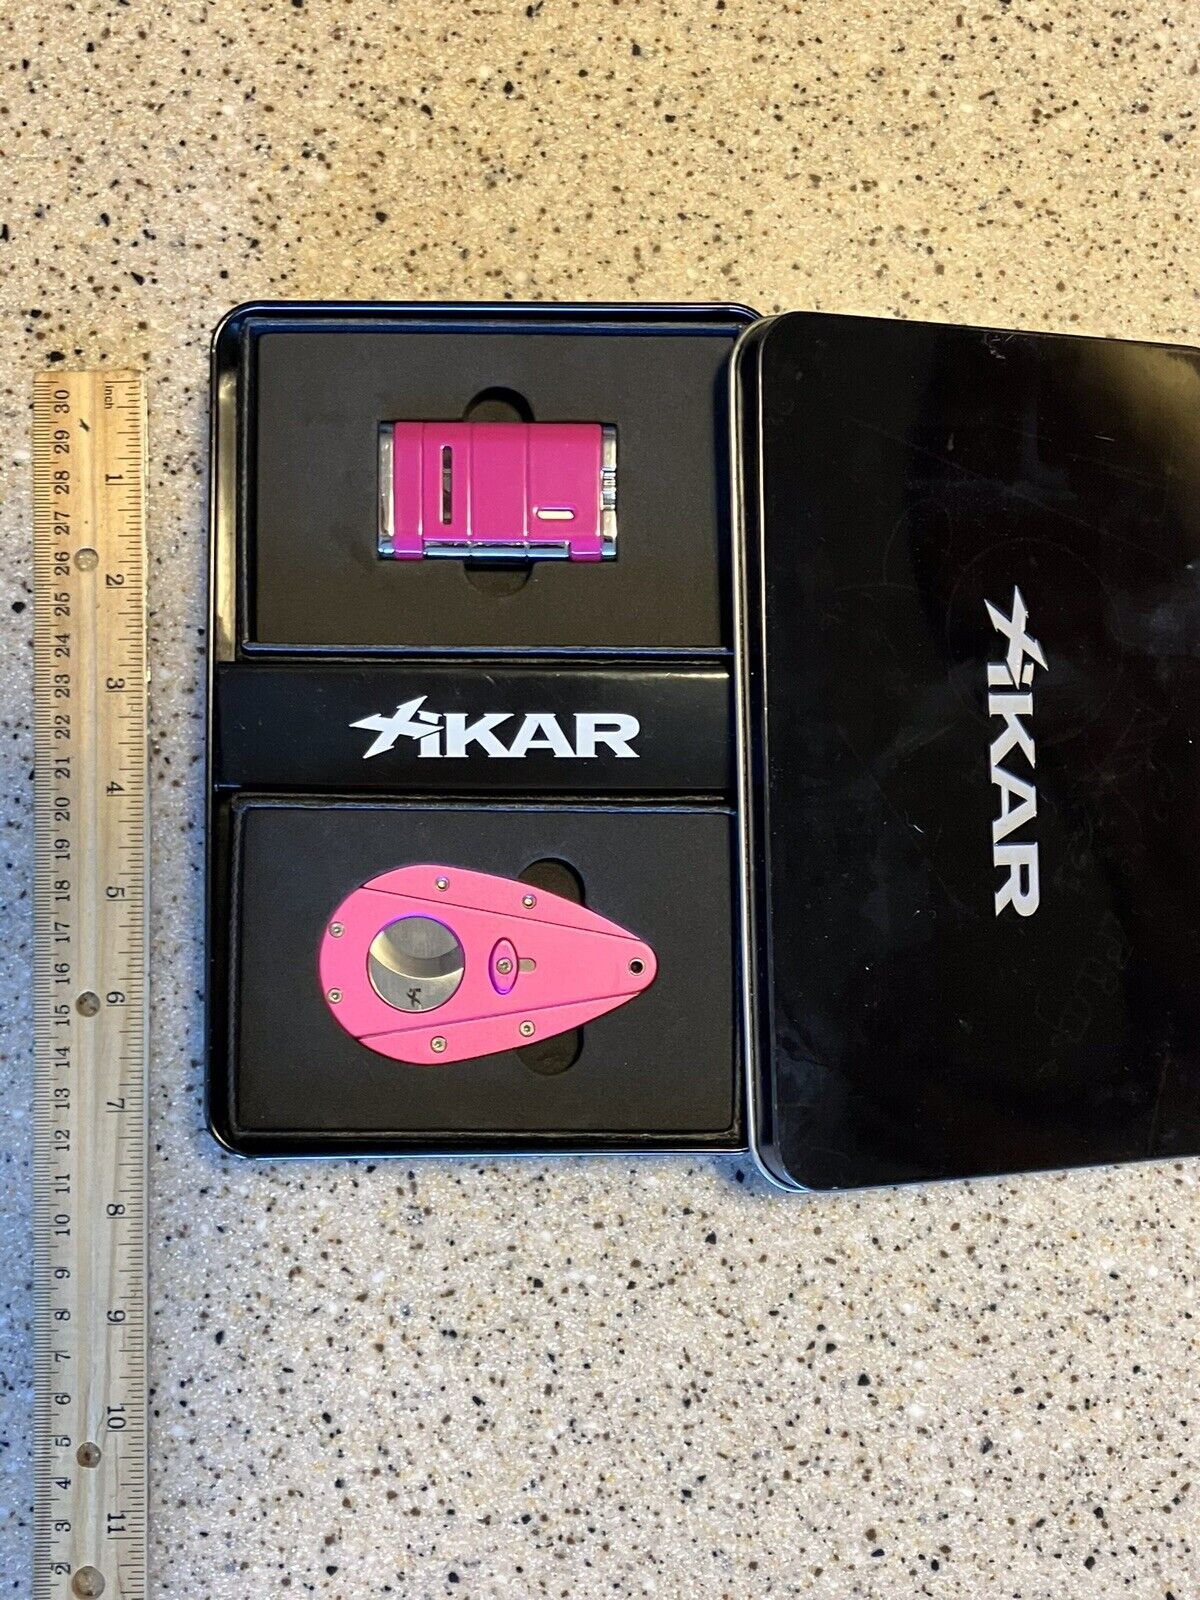 XiKAR 915PK Allume Single Flame Lighter and Xi1 Limited Edition Cutter Gift Box